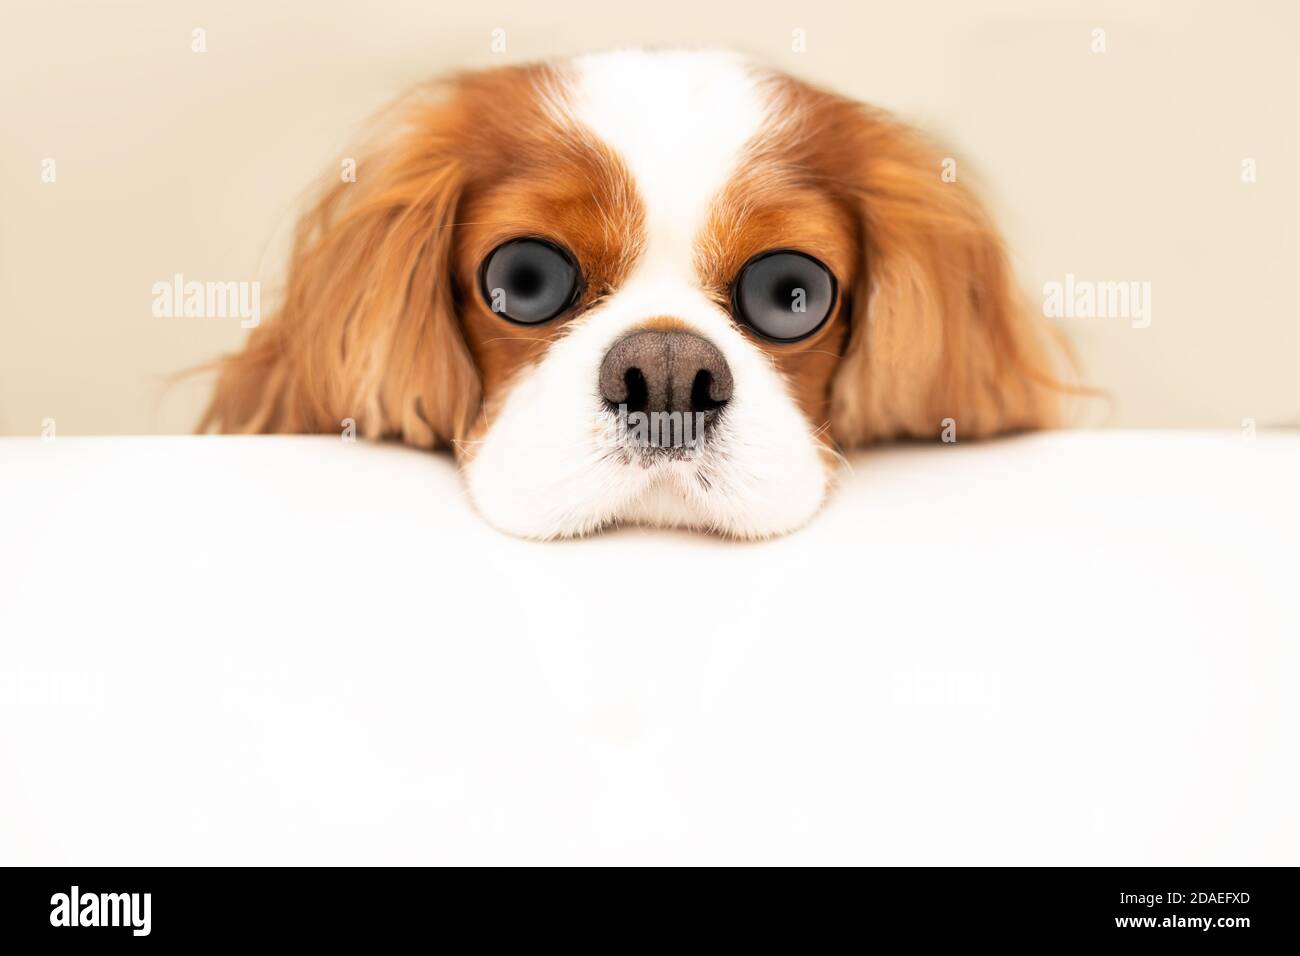 Funny photo of a dog with bulging eyes and a swollen nose. The Cavalier King Charles Spaniel put his head on the table. Hungry dog humor concept. Copy Stock Photo